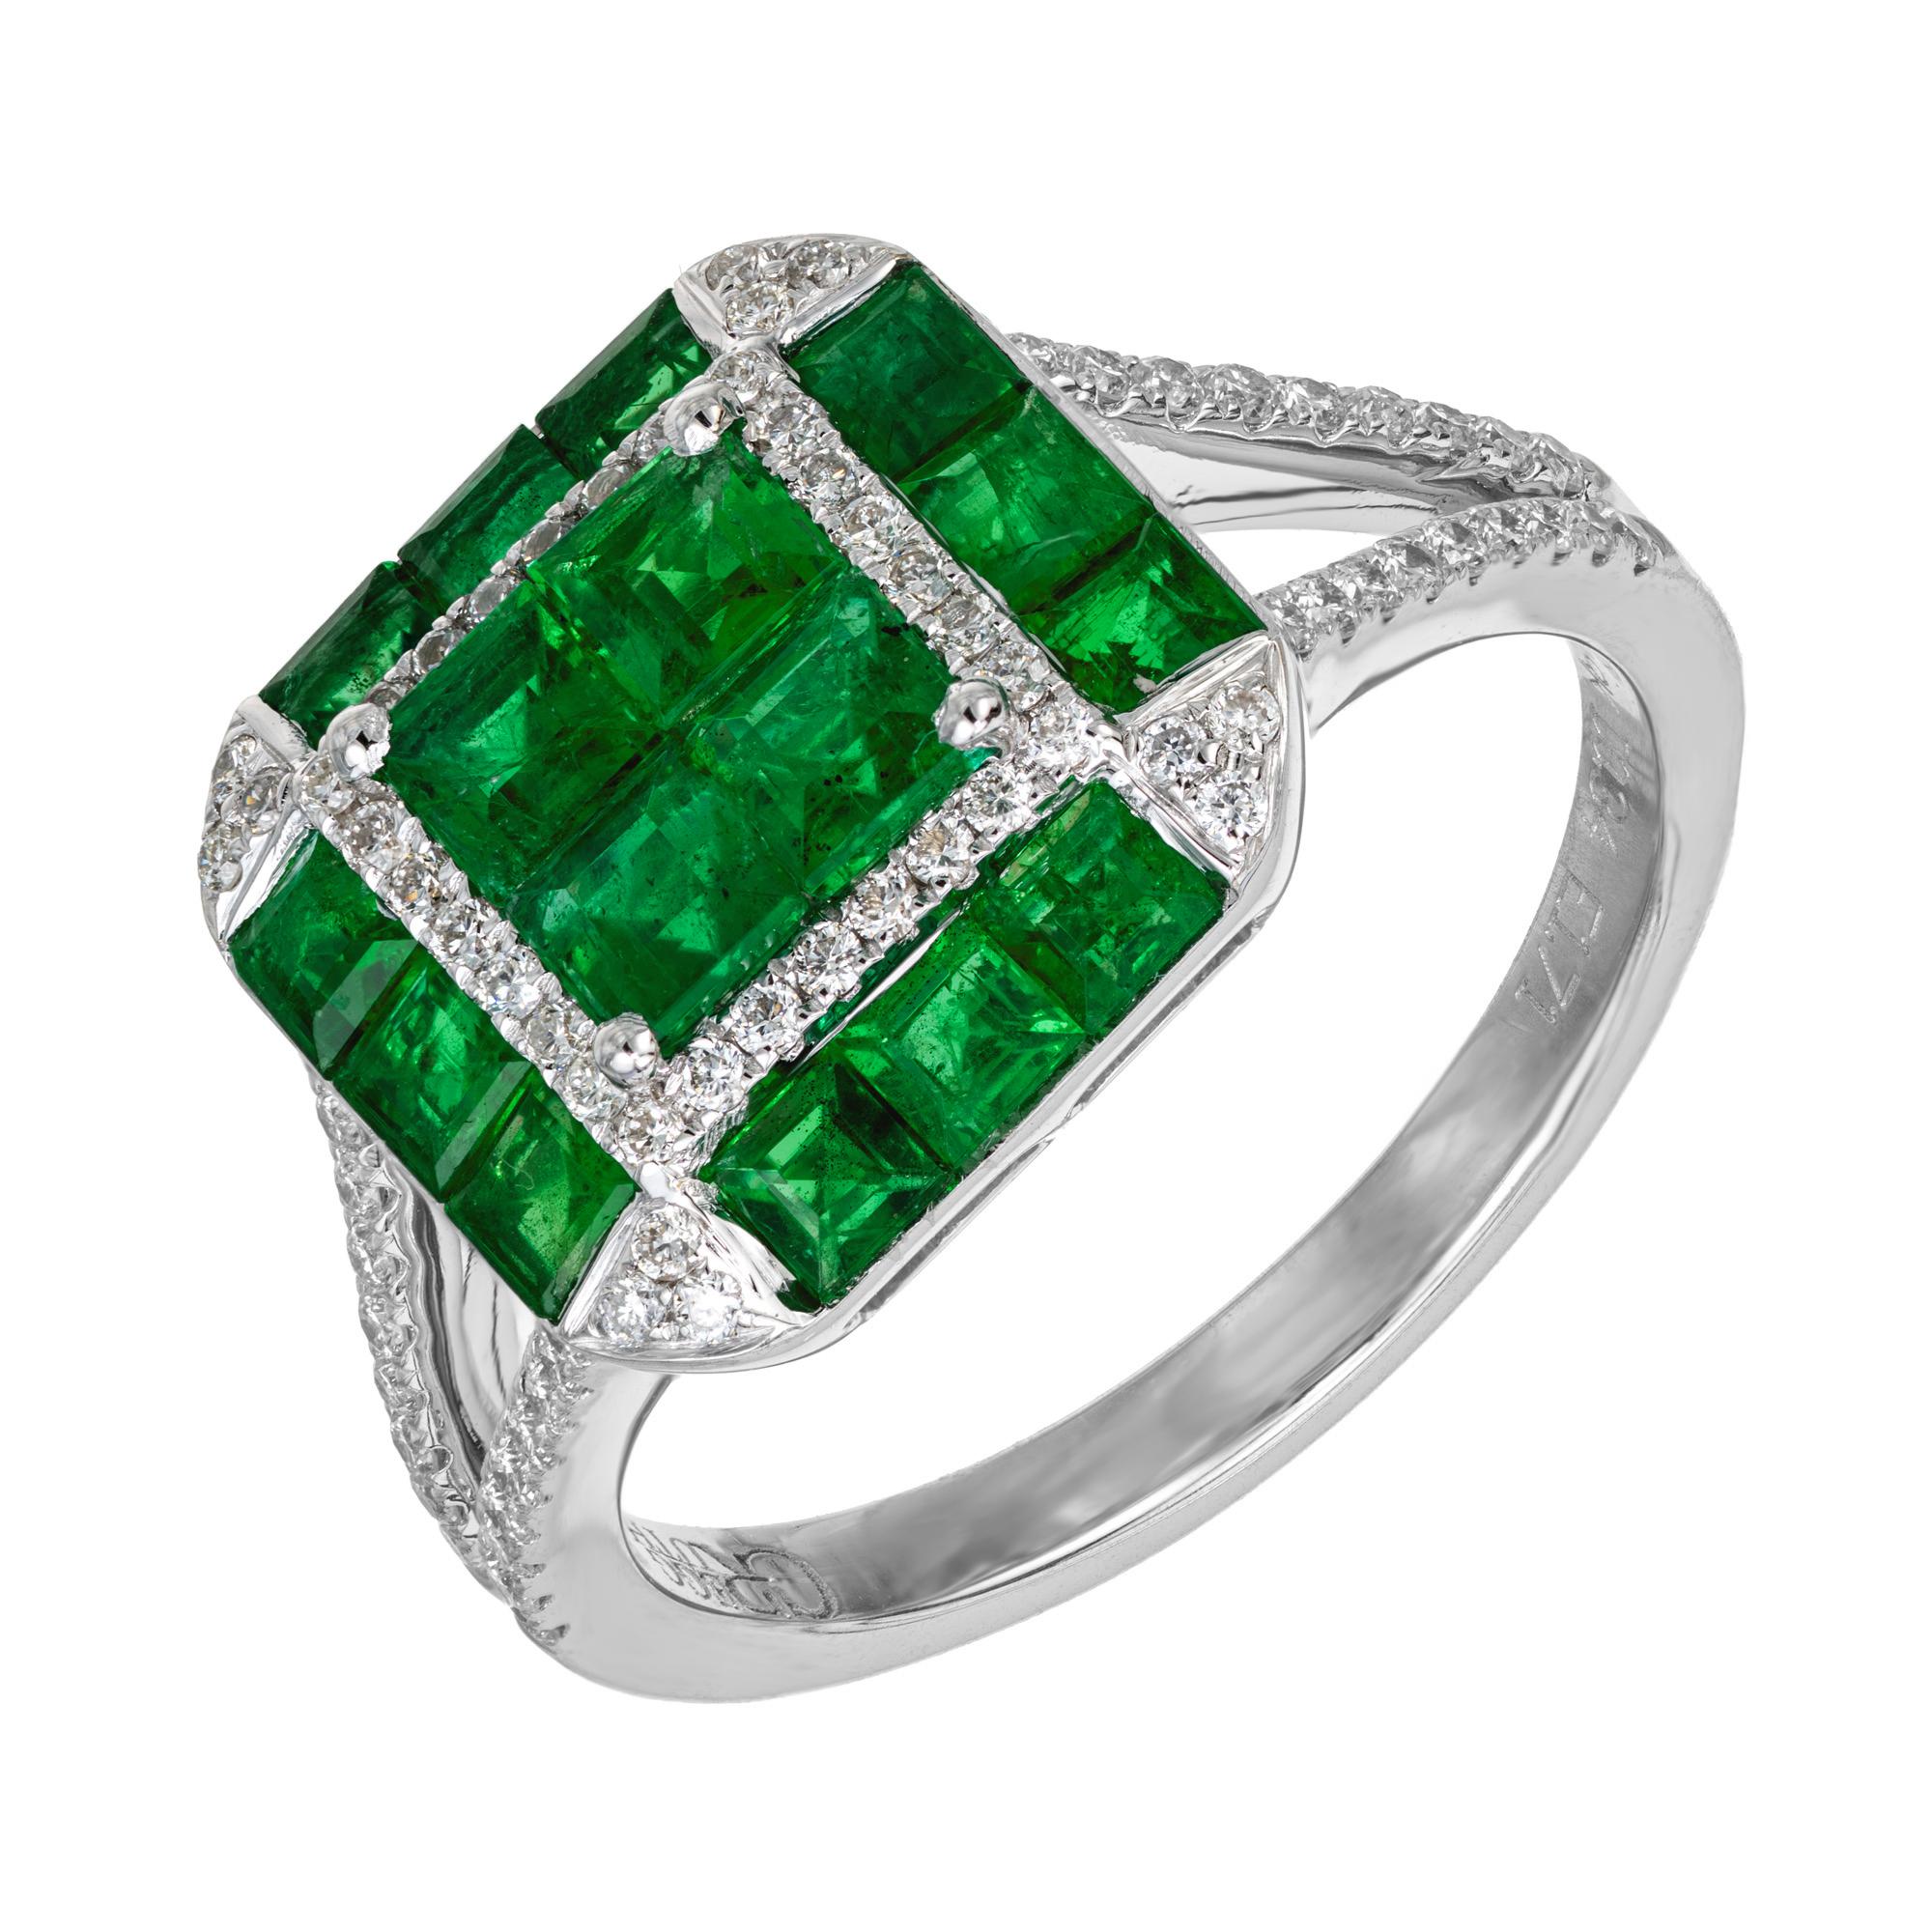 Beautiful bright green natural emerald and diamond ring. From designer Gregg Ruth, this ring boasts 16 square cut GIA certified emeralds totaling 1.71cts. and 76 round brilliant cut diamonds totaling .34cts. The four center mounted emeralds have a